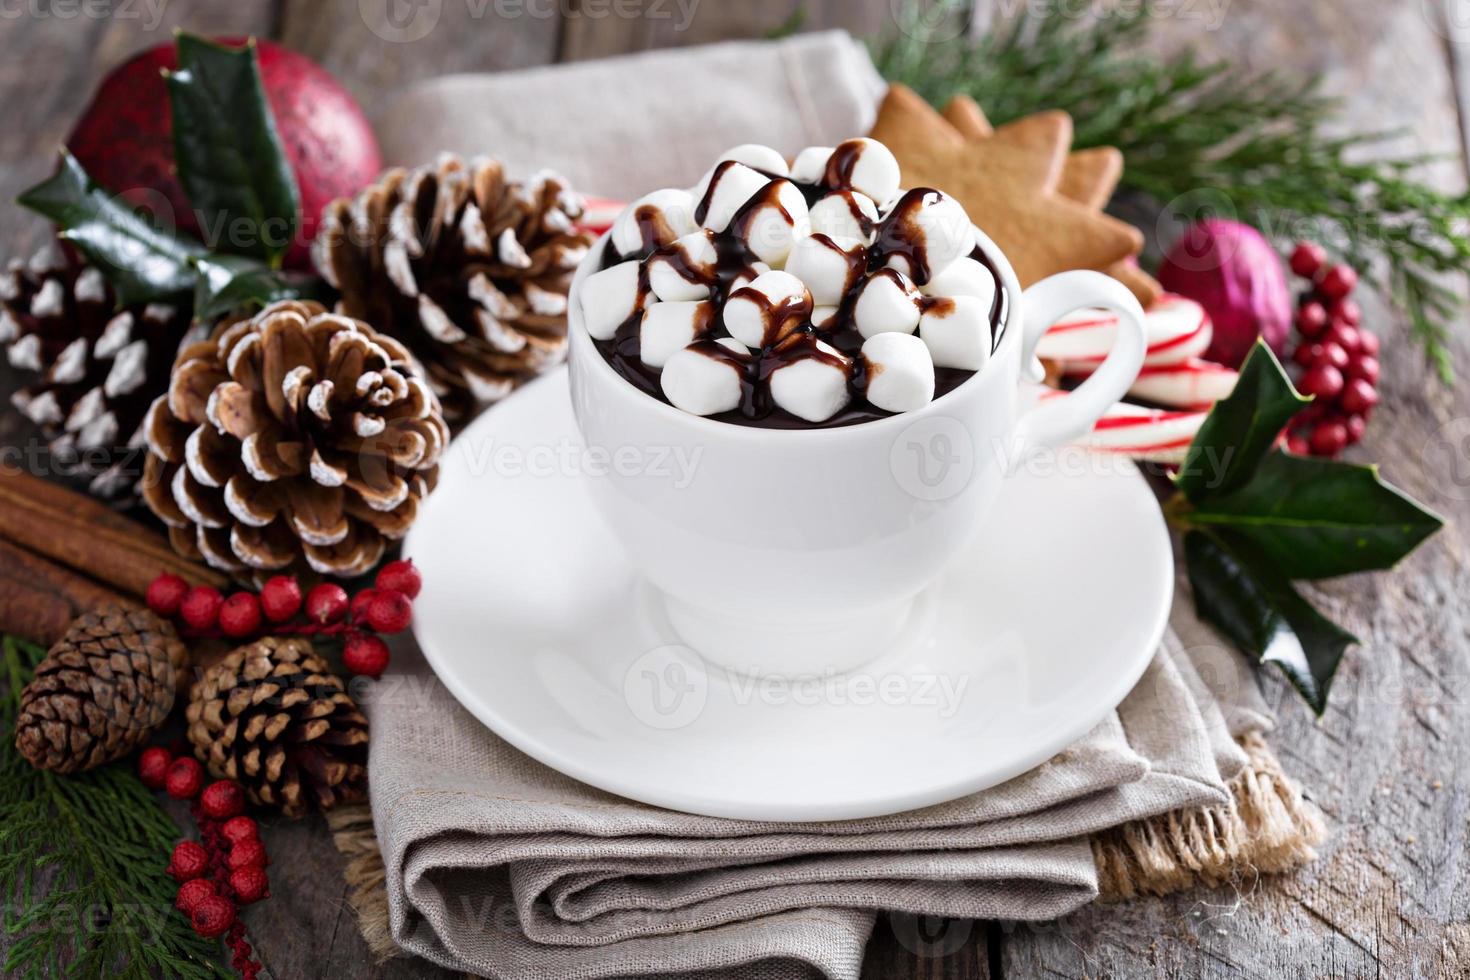 Christmas hot chocolate with ornaments photo